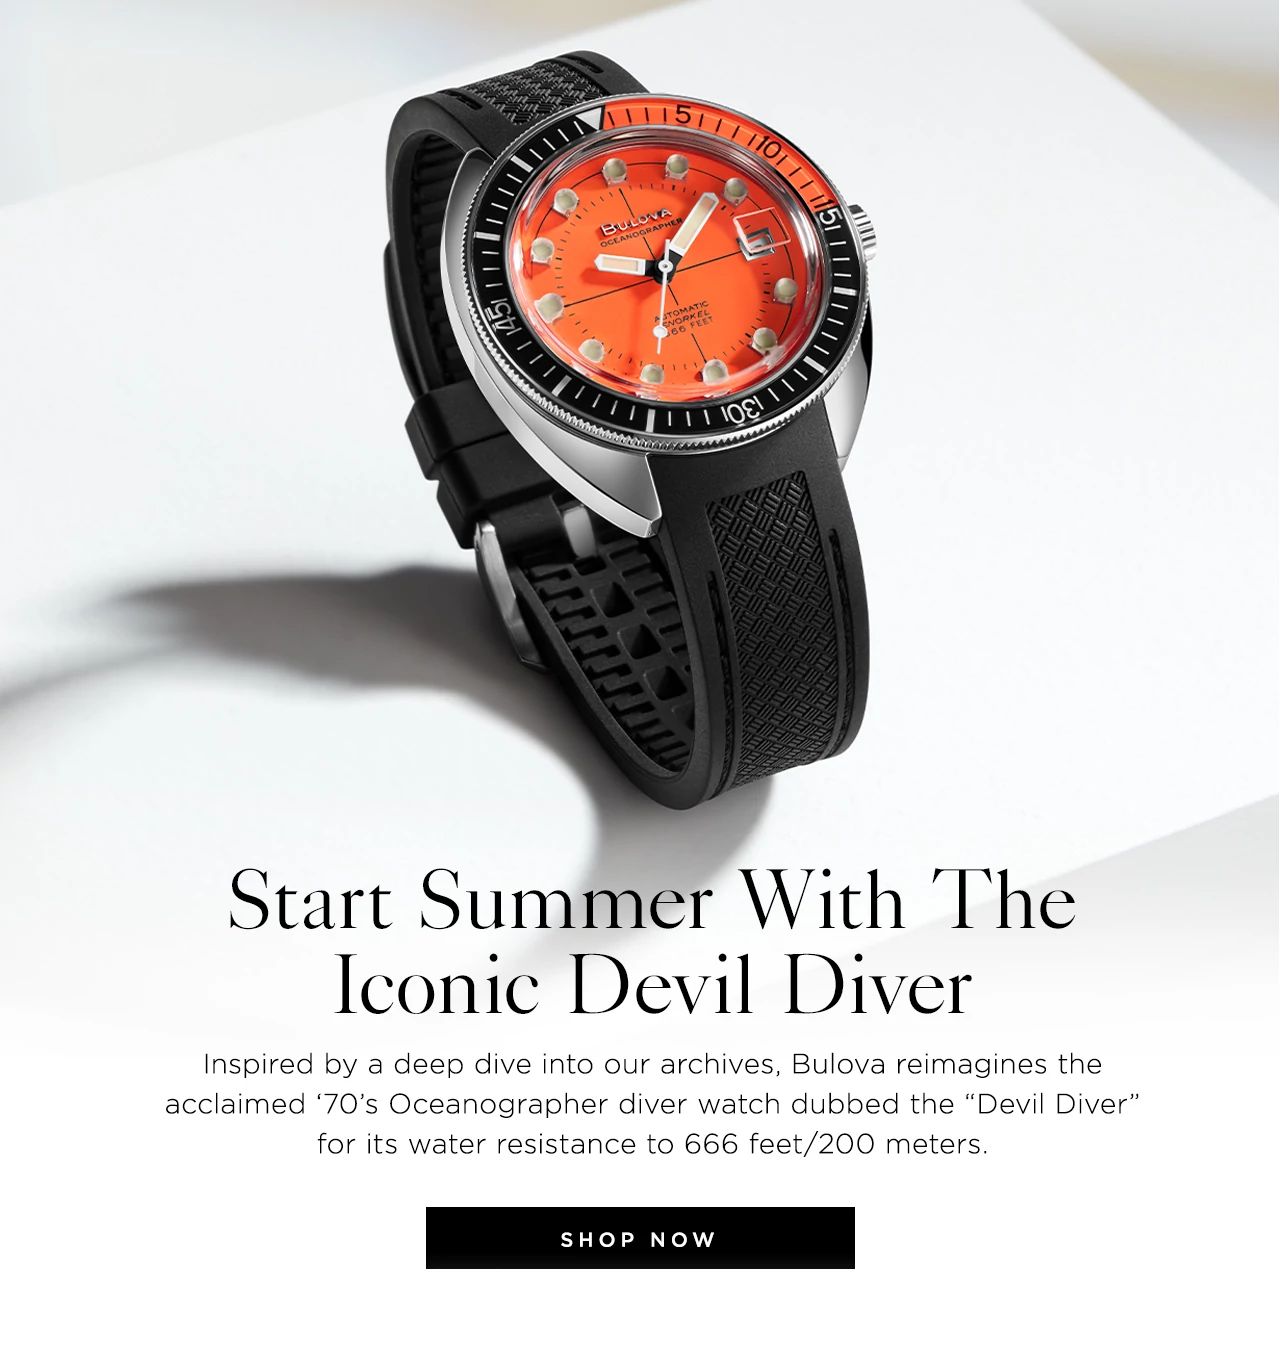 Start Summer With The Iconic Devil Diver: Inspired by a deep dive into our archives, Bulova reimagines the acclaimed ‘70’s Oceanographer diver watch dubbed the “Devil Diver” for its water resistance to 666 feet/200 meters.